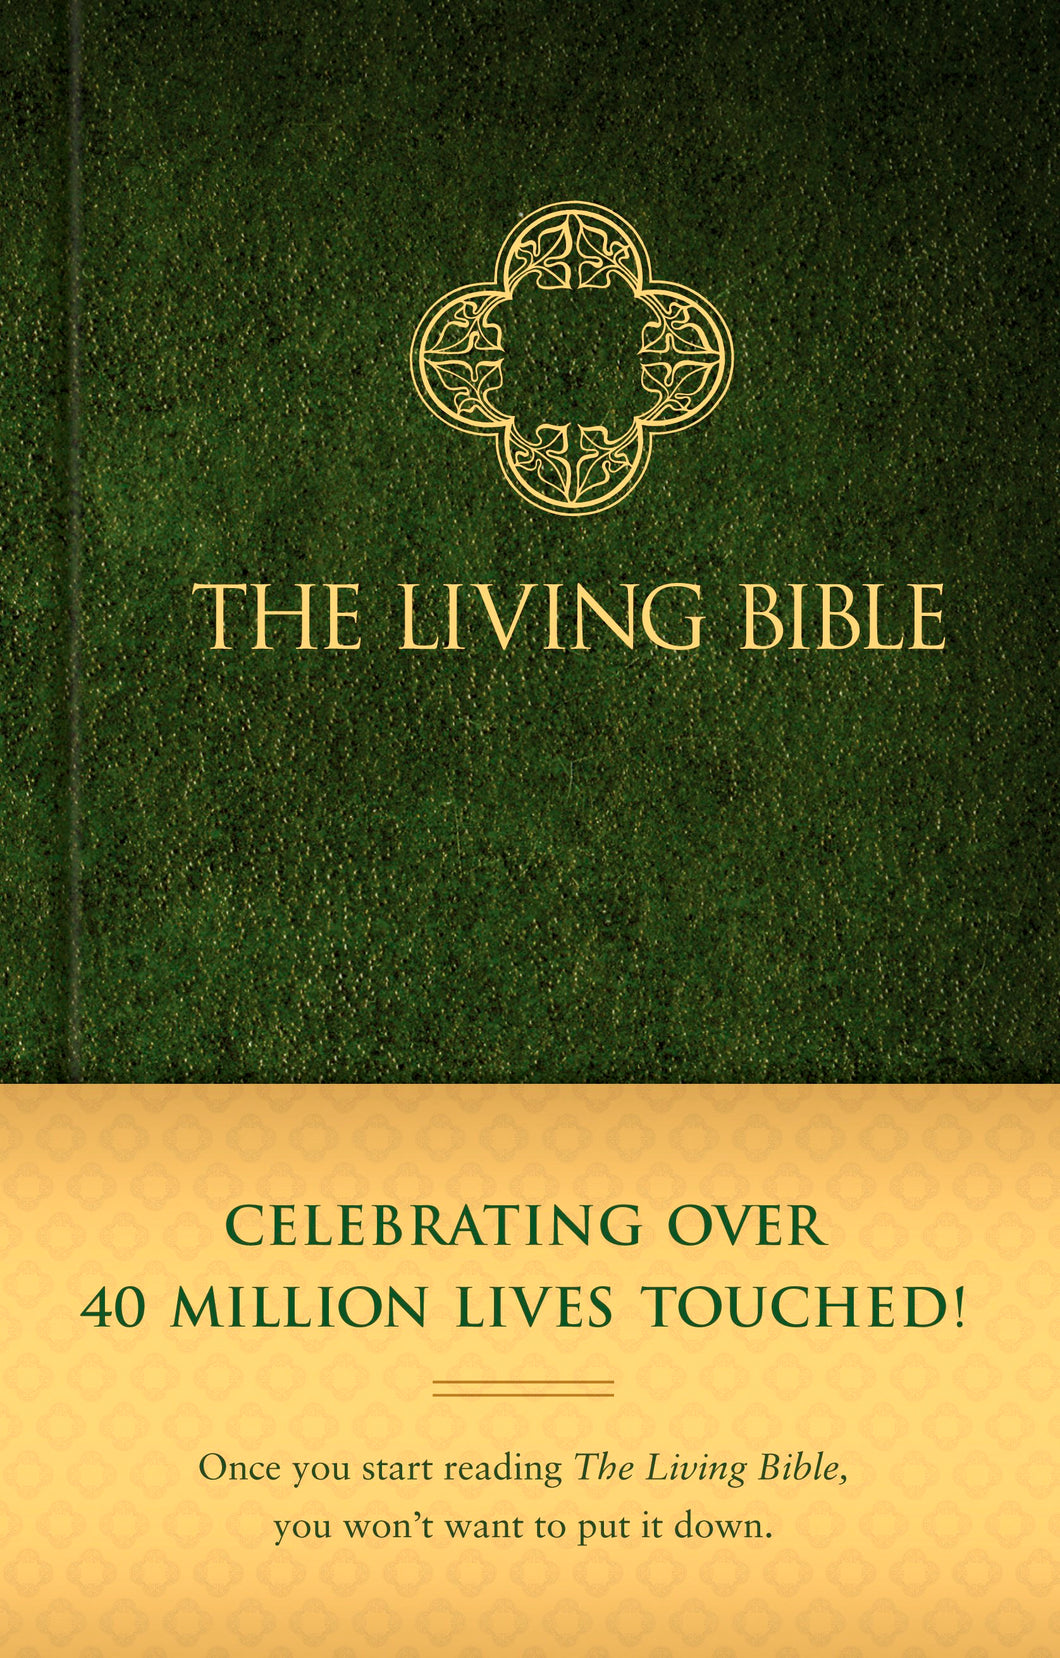 TLB The Living Bible/Text Edition-Hardcover